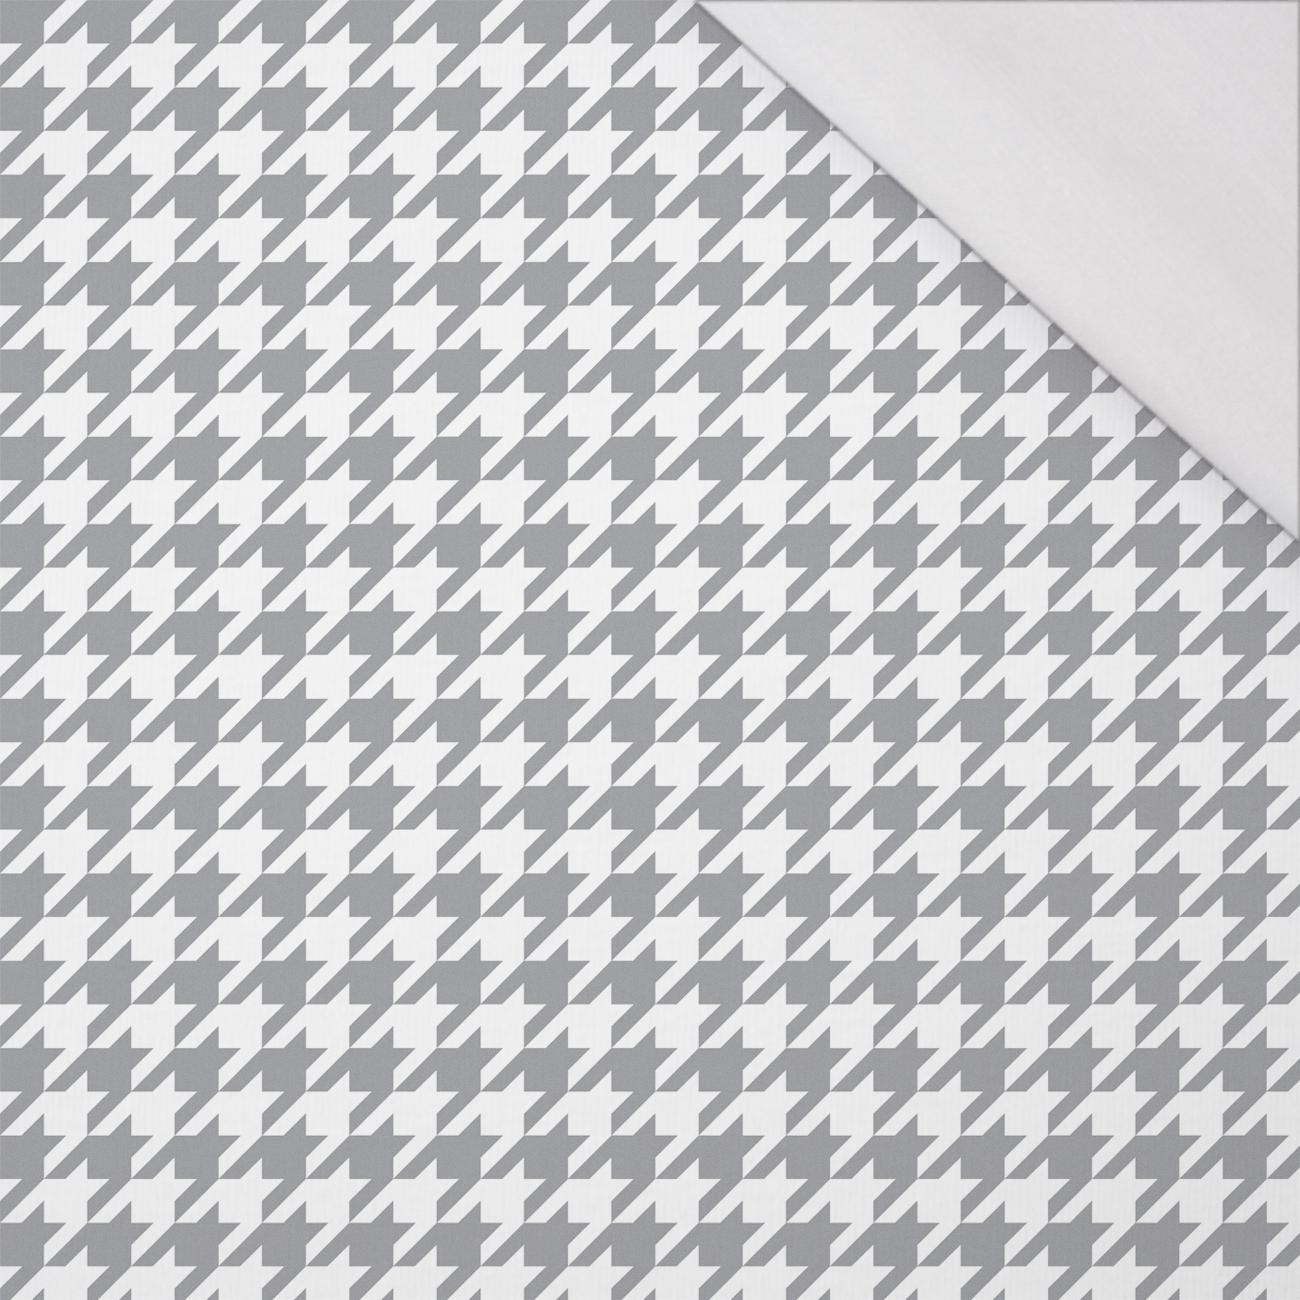 GREY HOUNDSTOOTH / WHITE - single jersey 